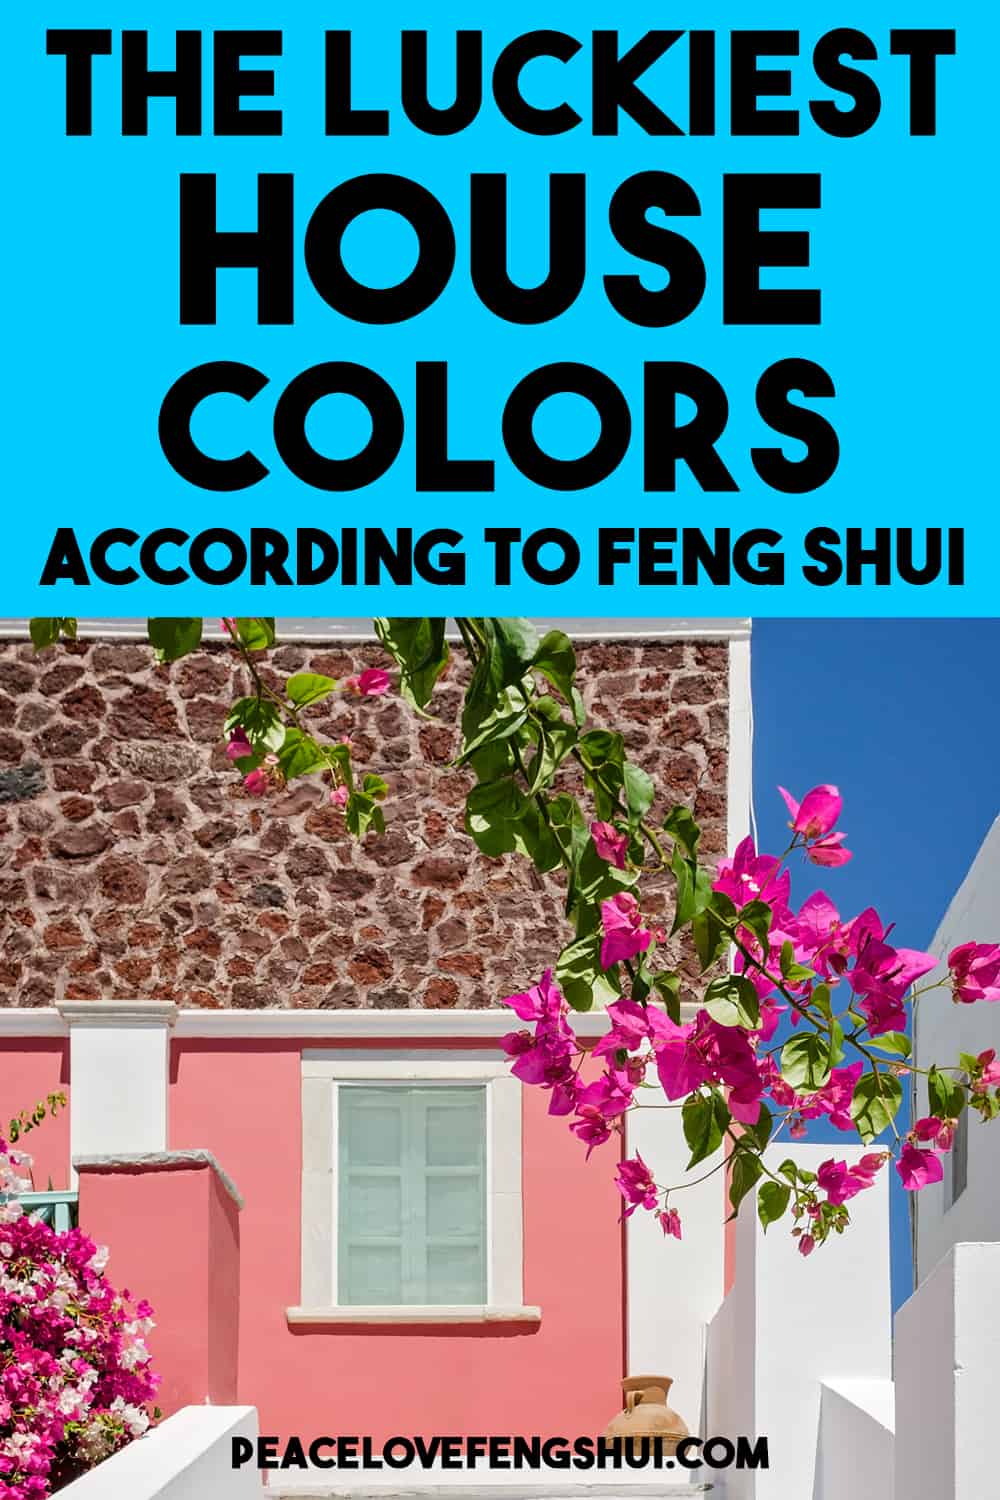 the luckiest house colors according to feng shui